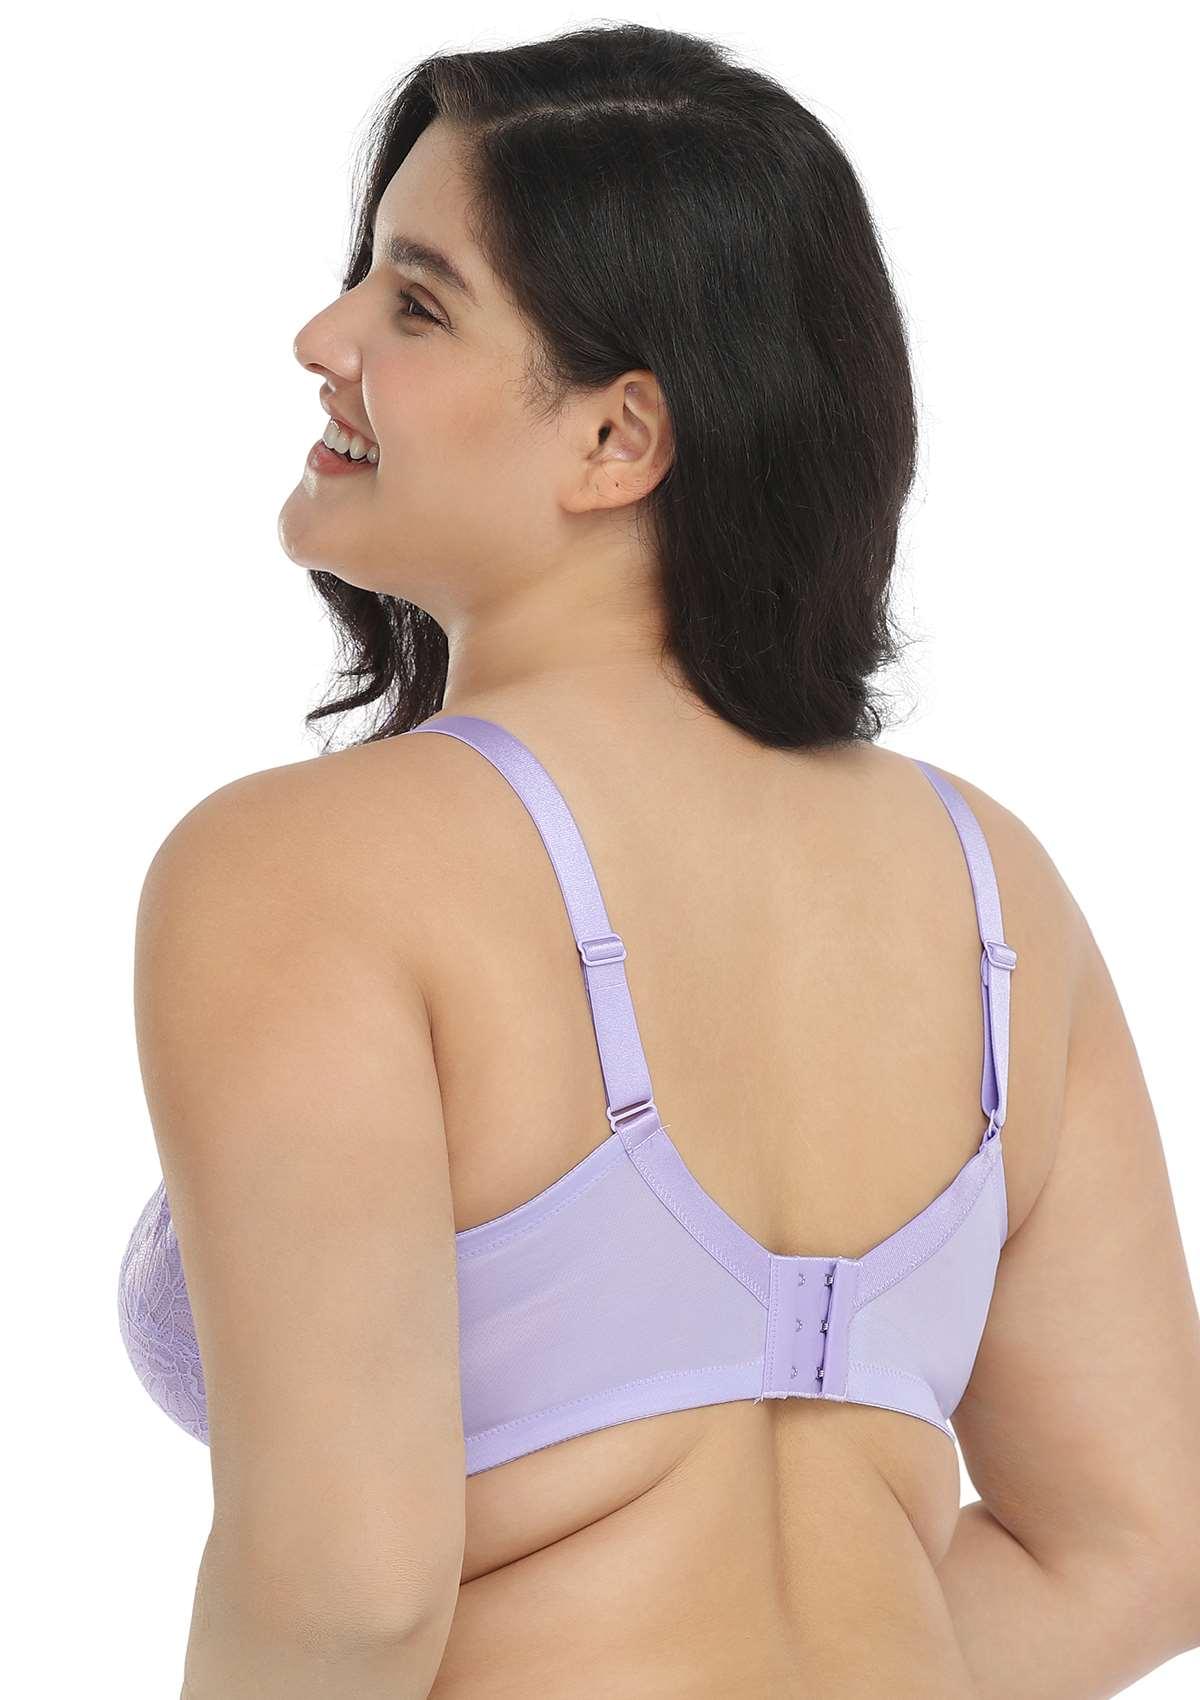 HSIA Blossom Transparent Lace Bra: Plus Size Wired Back Smoothing Bra - Purple / 34 / DDD/F